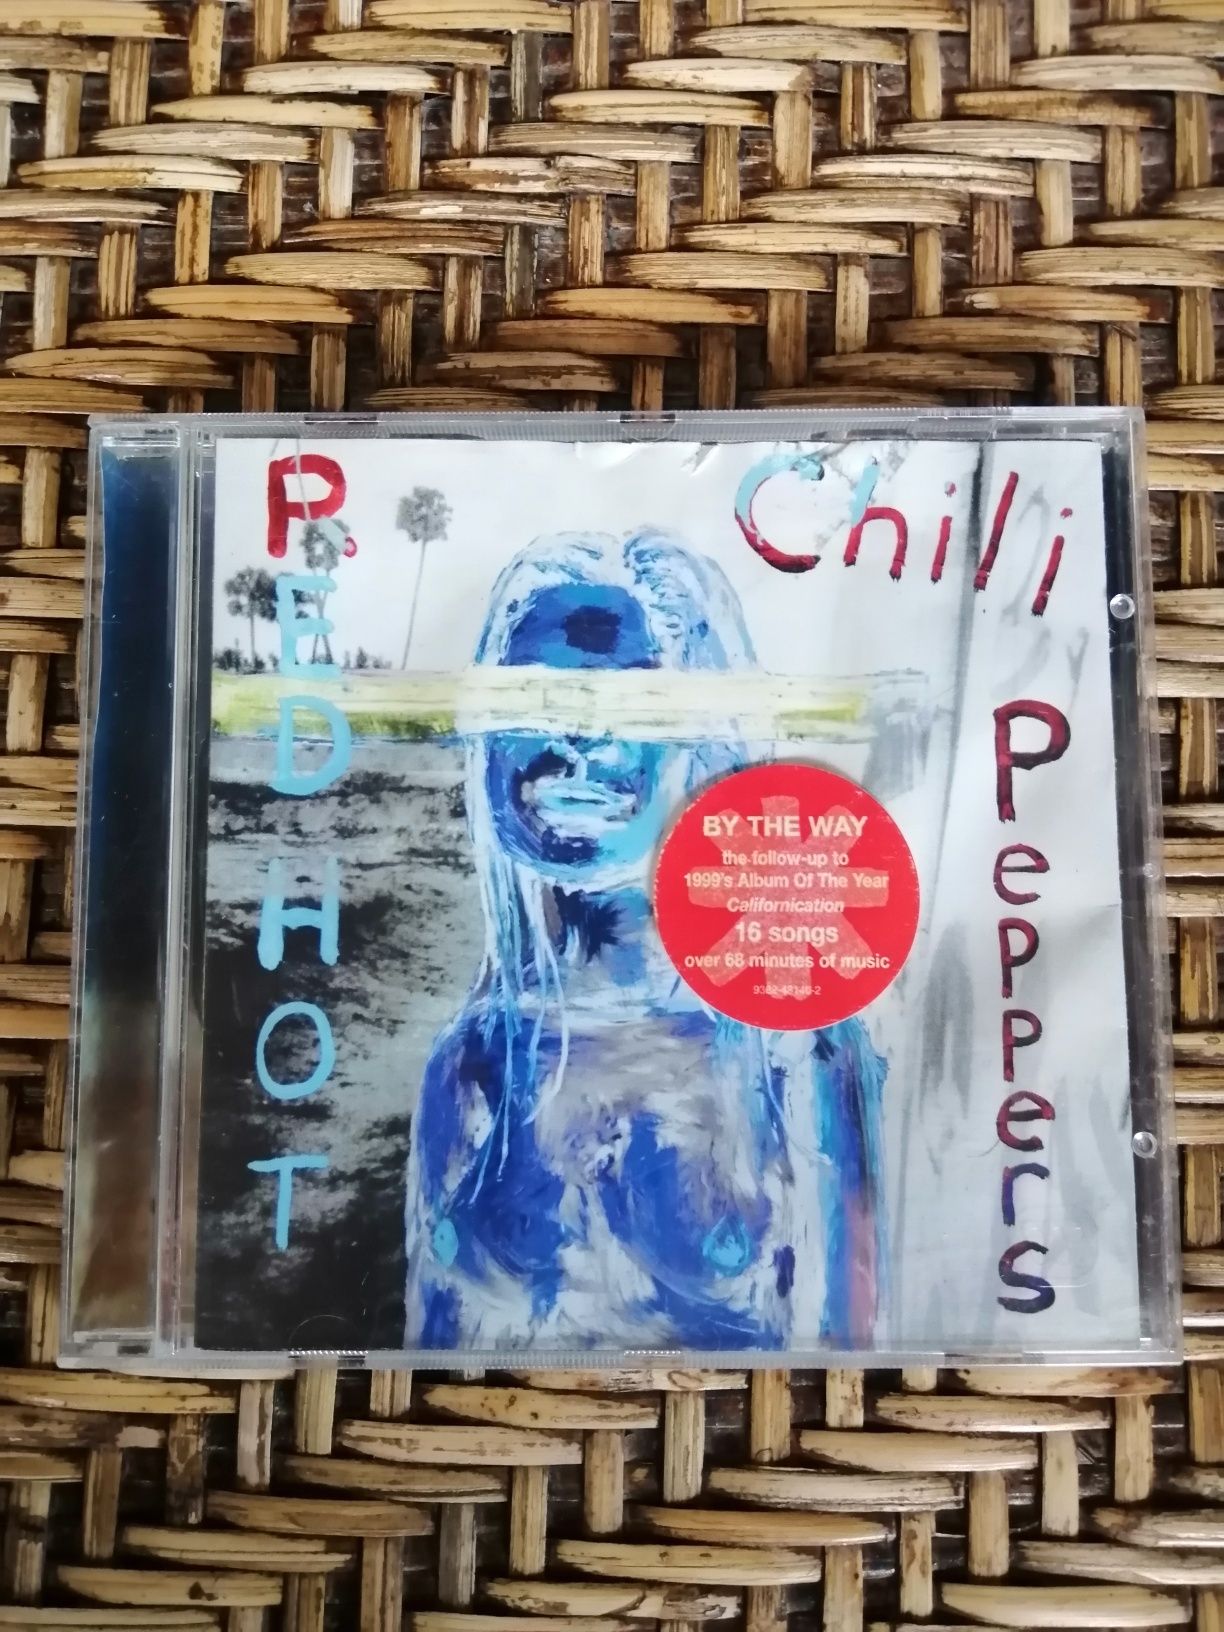 CD By the Way, Red Hot Chili Peppers